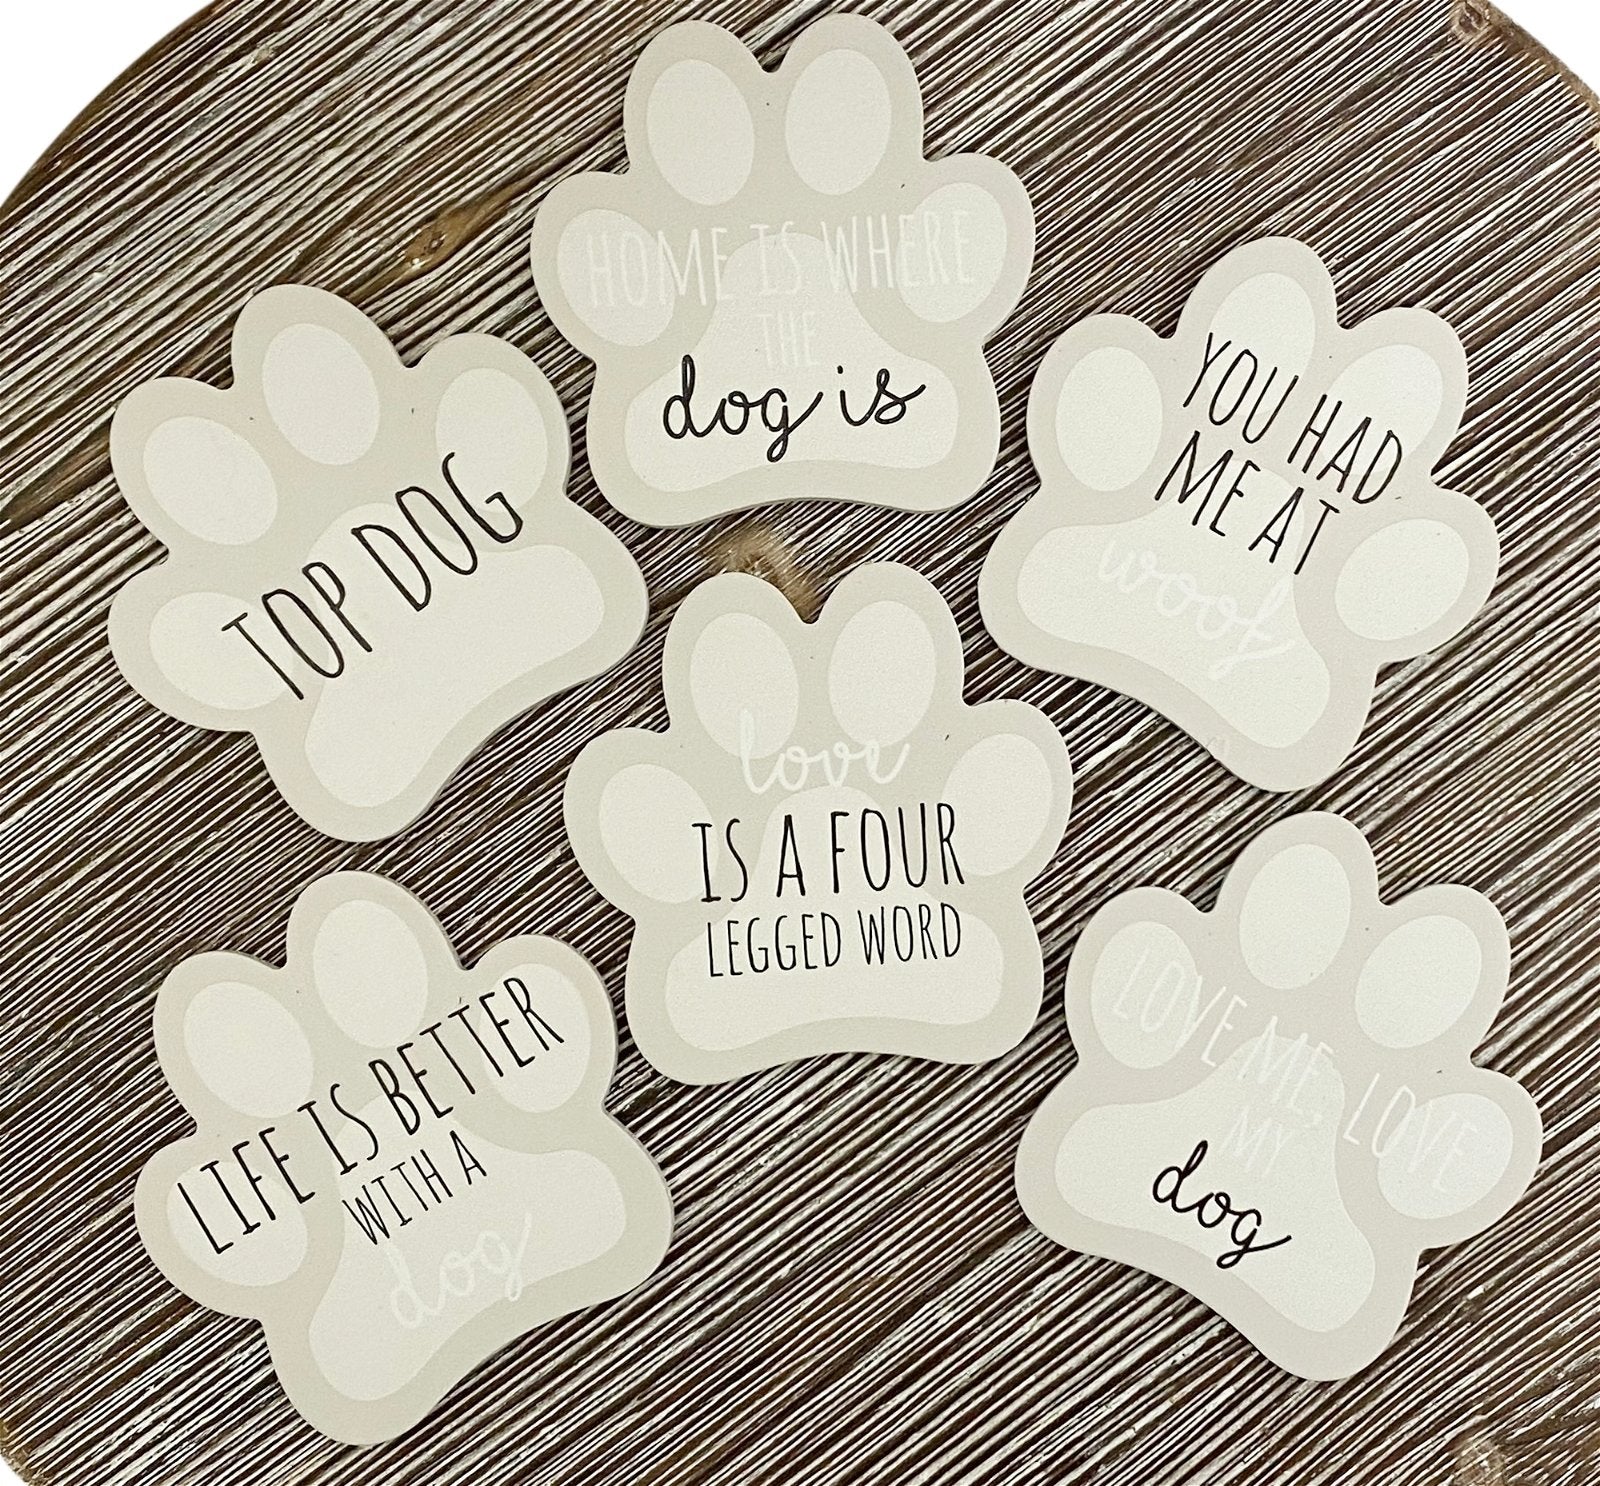 Set of 6 Dog Paw Shaped Coasters With Assorted Quotes